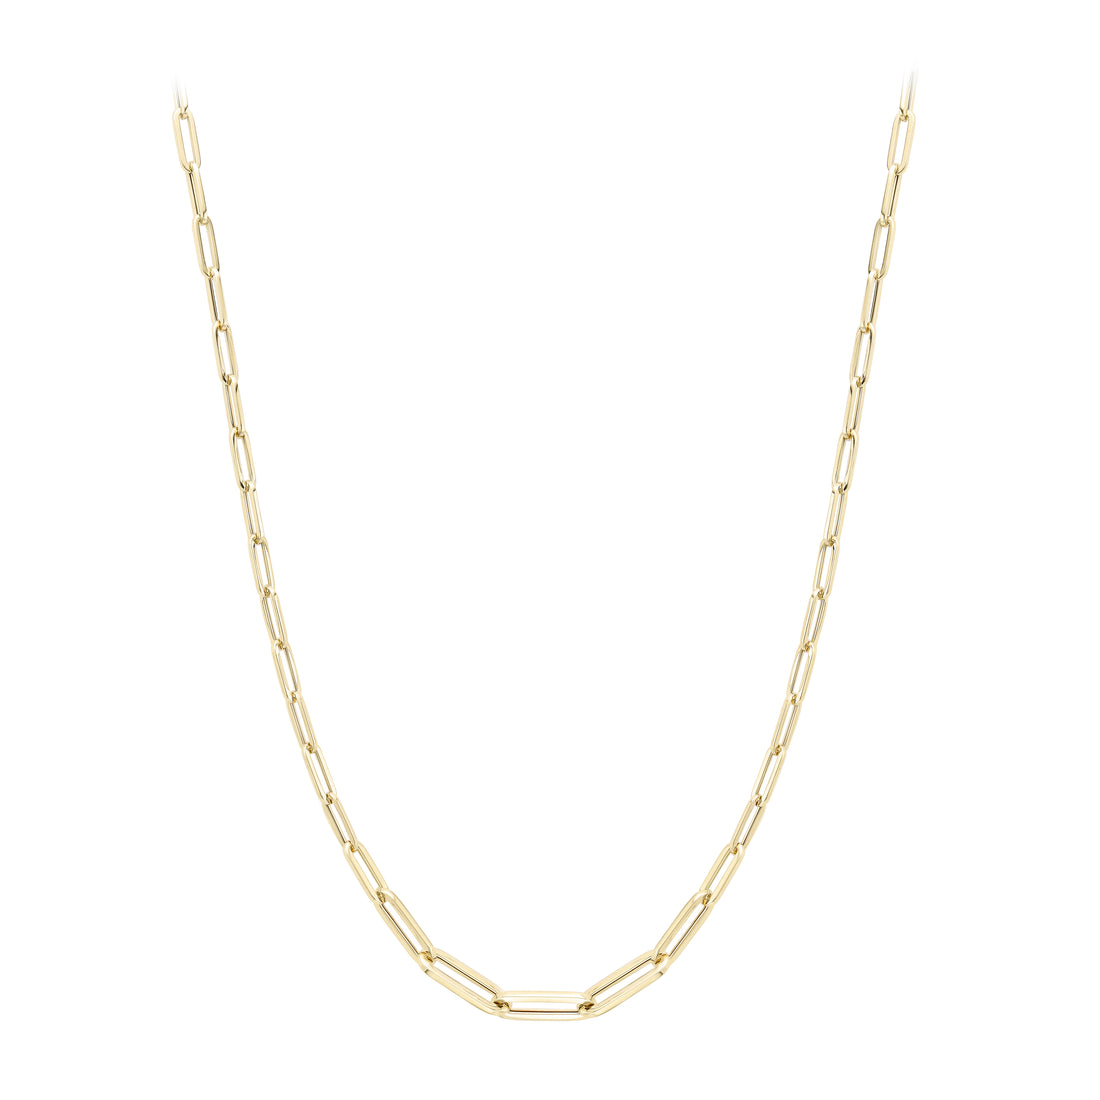 9ct. Yellow Gold Graduated Oval Link Necklet - Robert Anthony Jewellers, Edinburgh